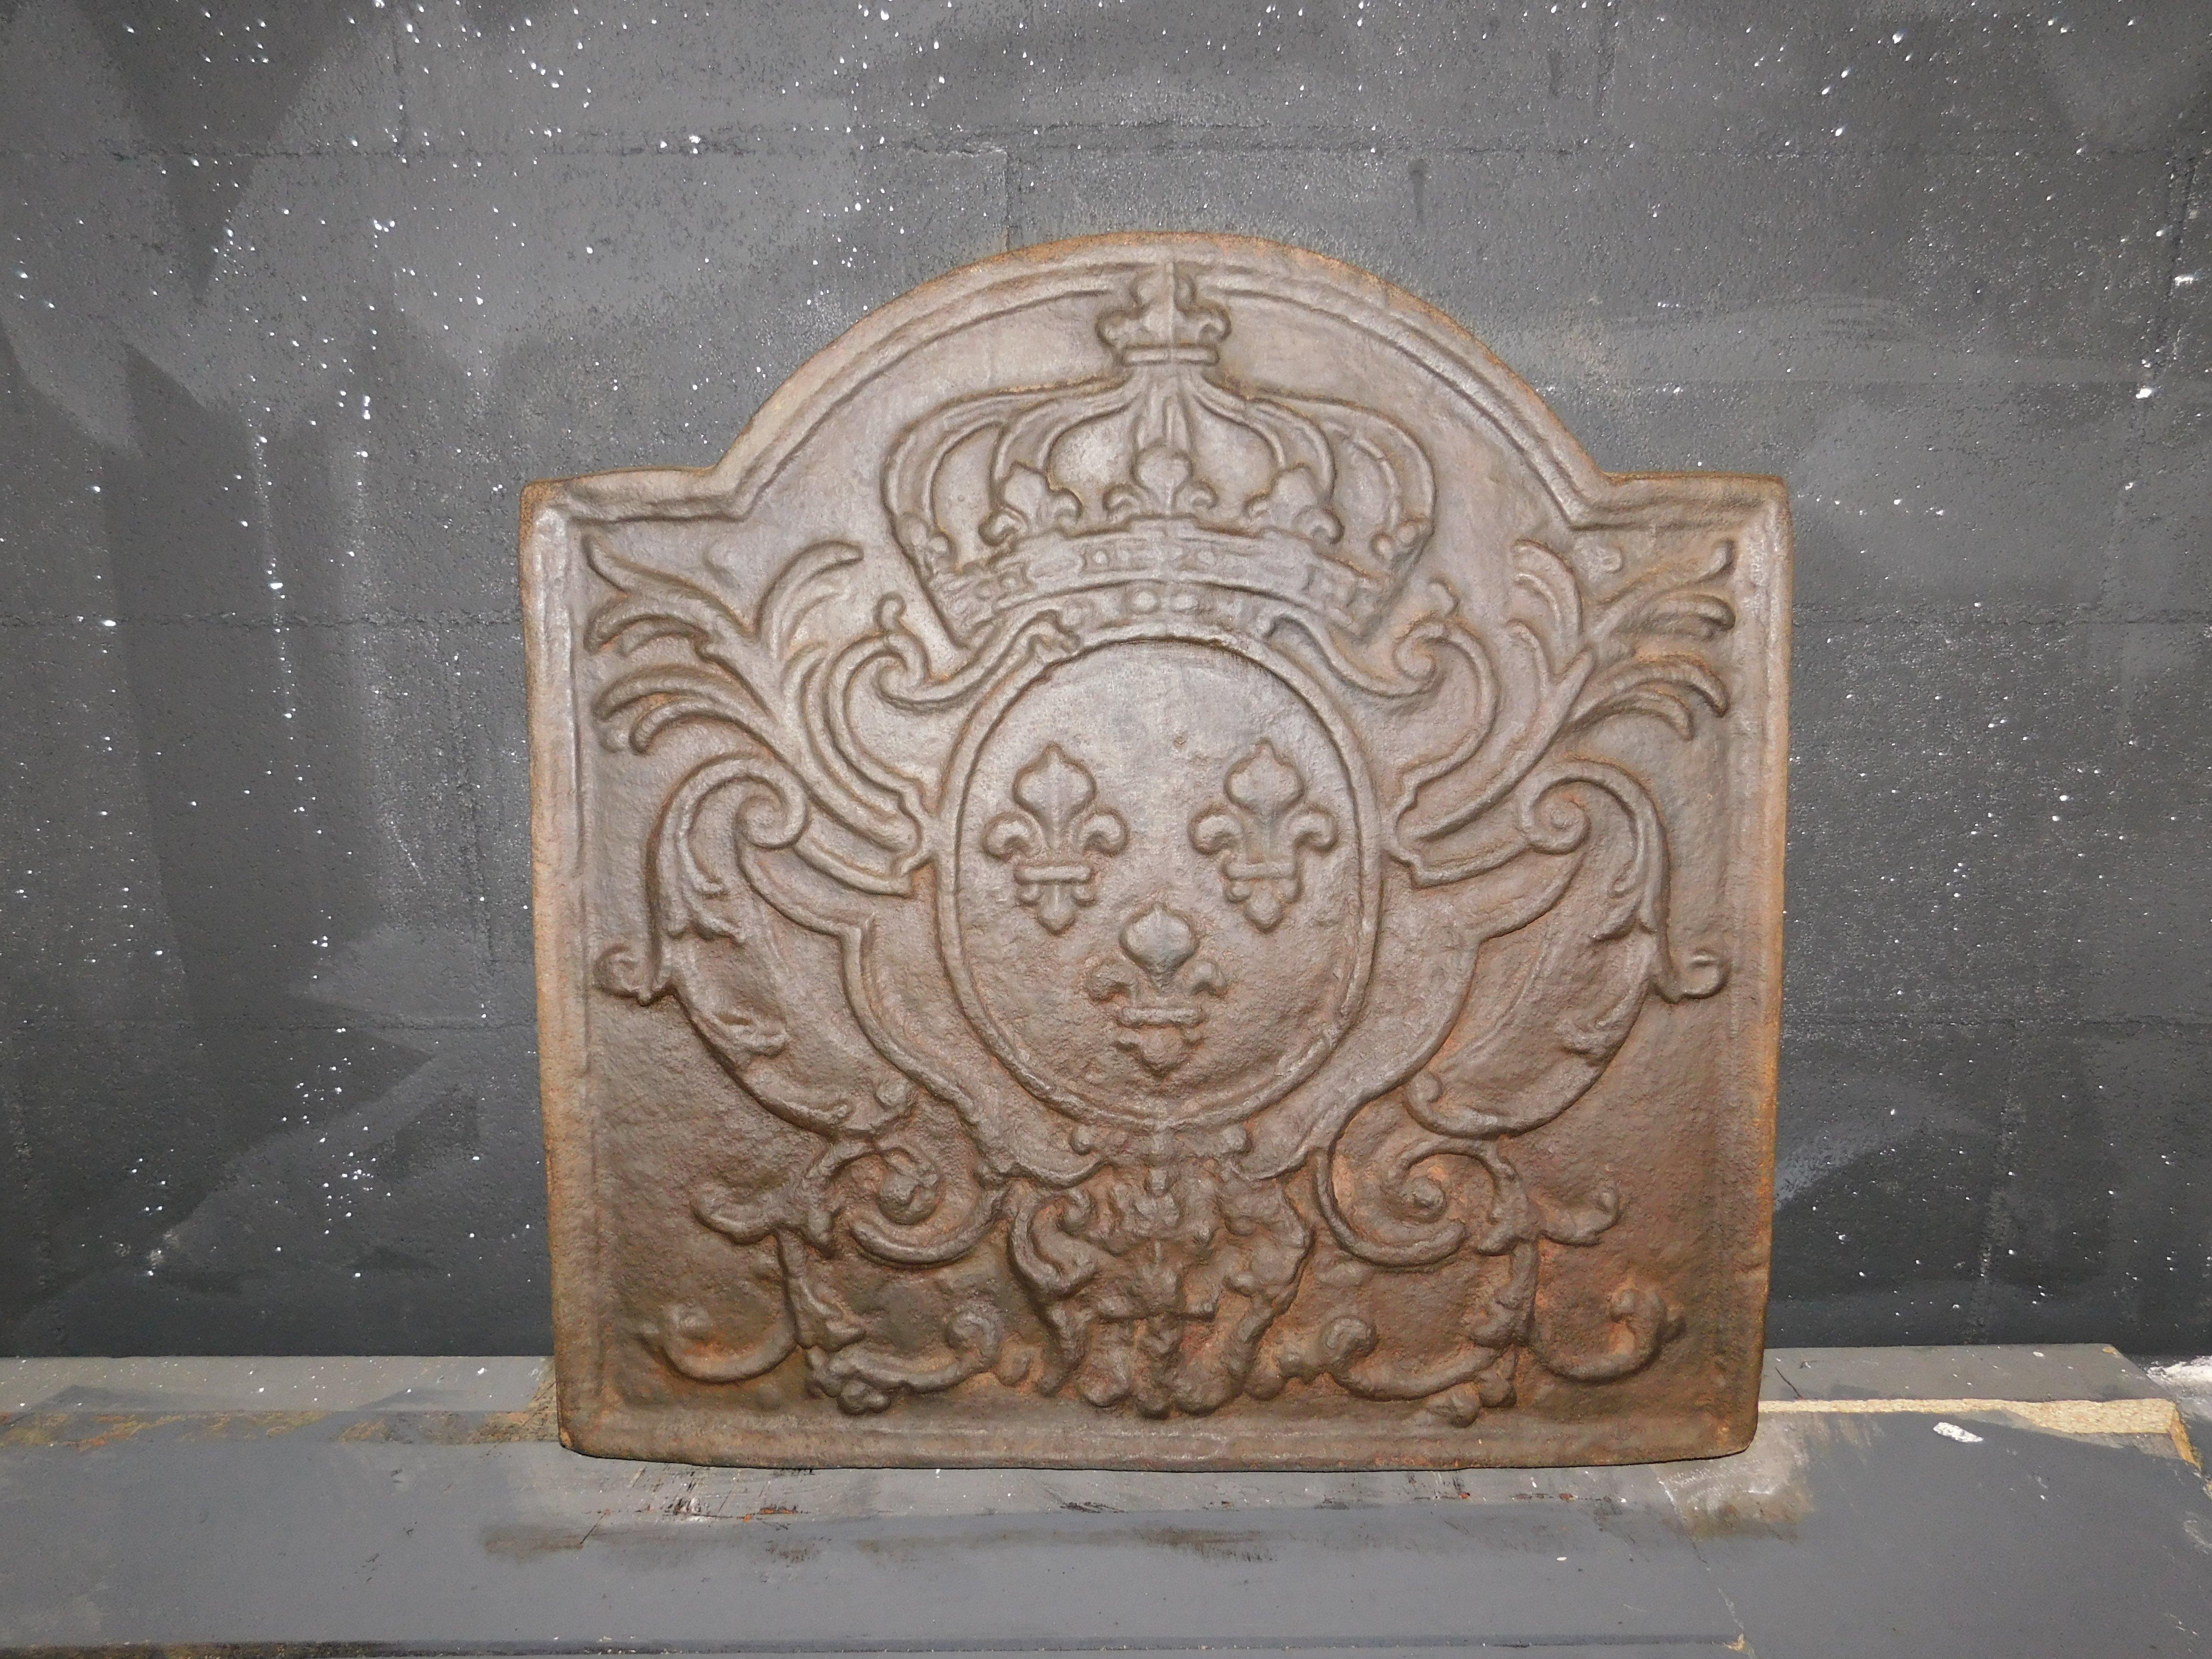 fireplace bottom plate in cast iron with lilies and crown, size 54 x 54 cm, mid-nineteenth century